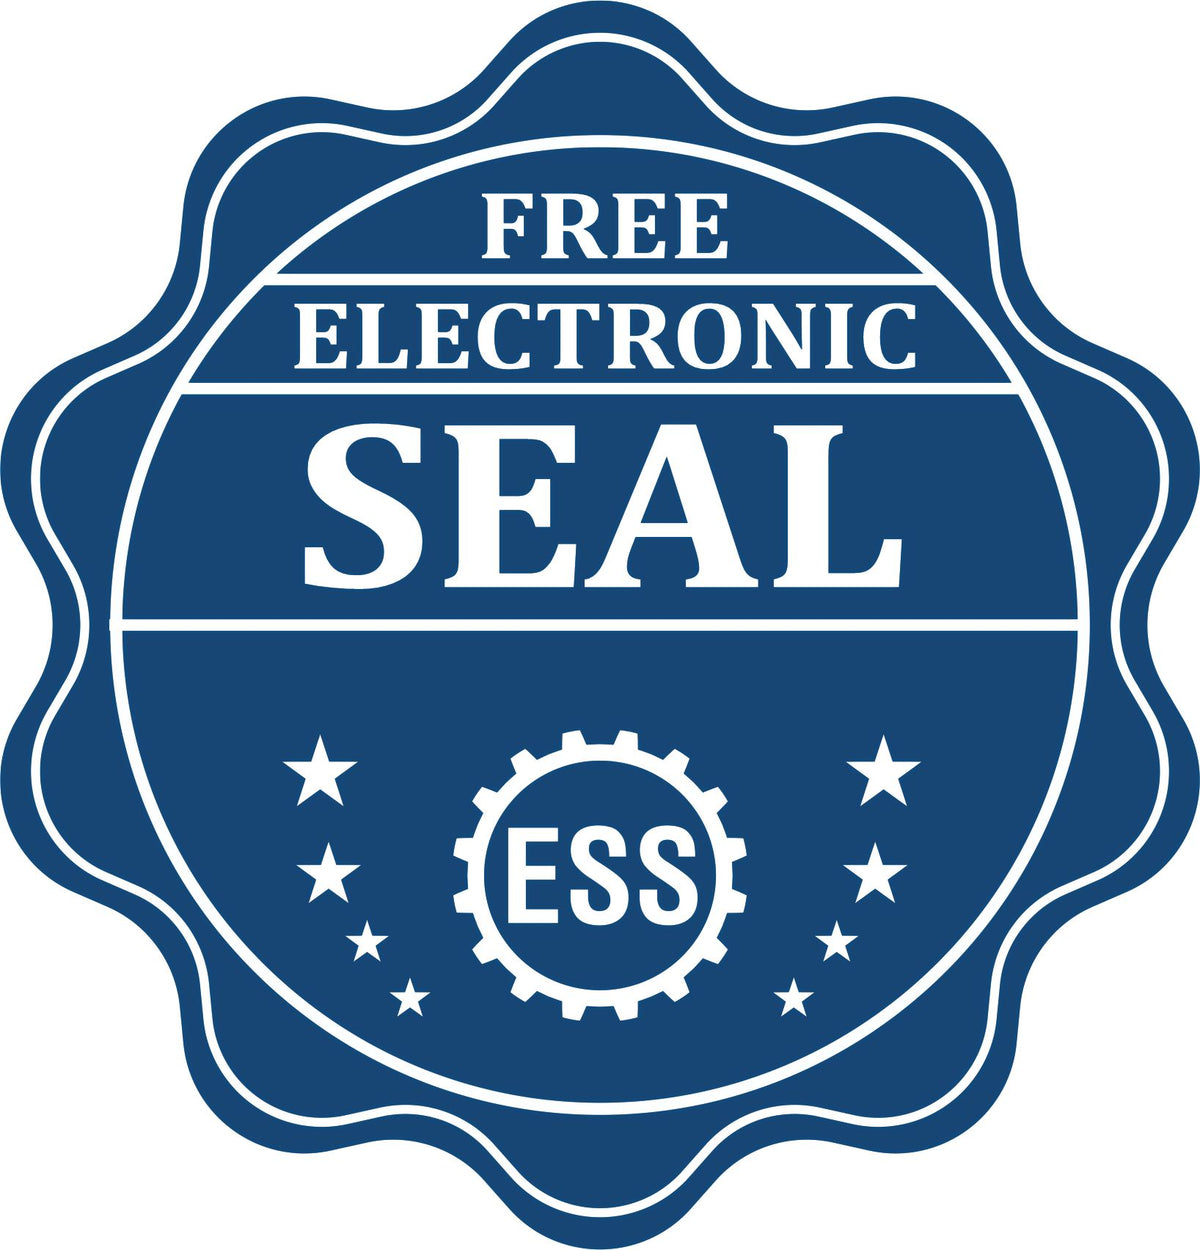 A badge showing a free electronic seal for the Hybrid Guam Geologist Seal with stars and the ESS gear on the emblem.